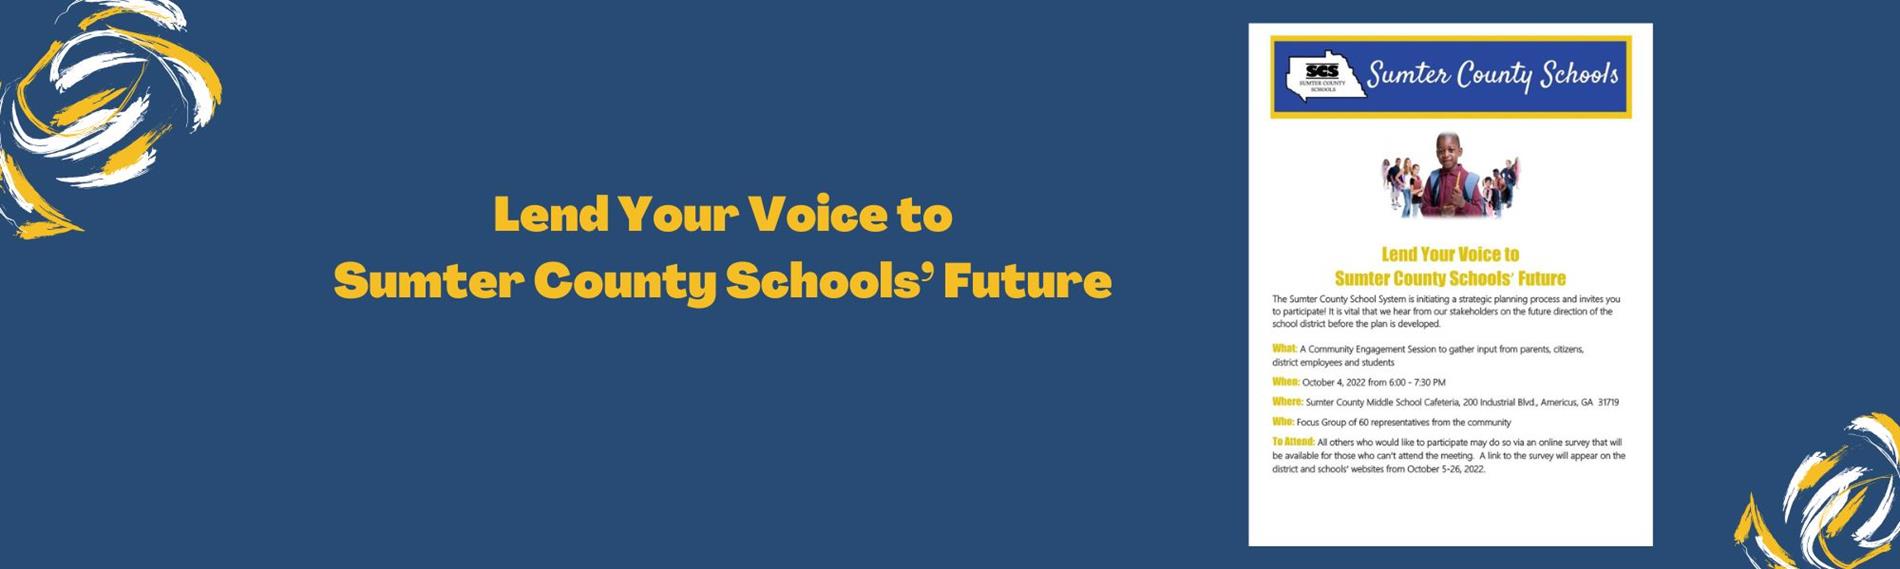 Lend Your Voice to Sumter County Schools’ Future Flyer